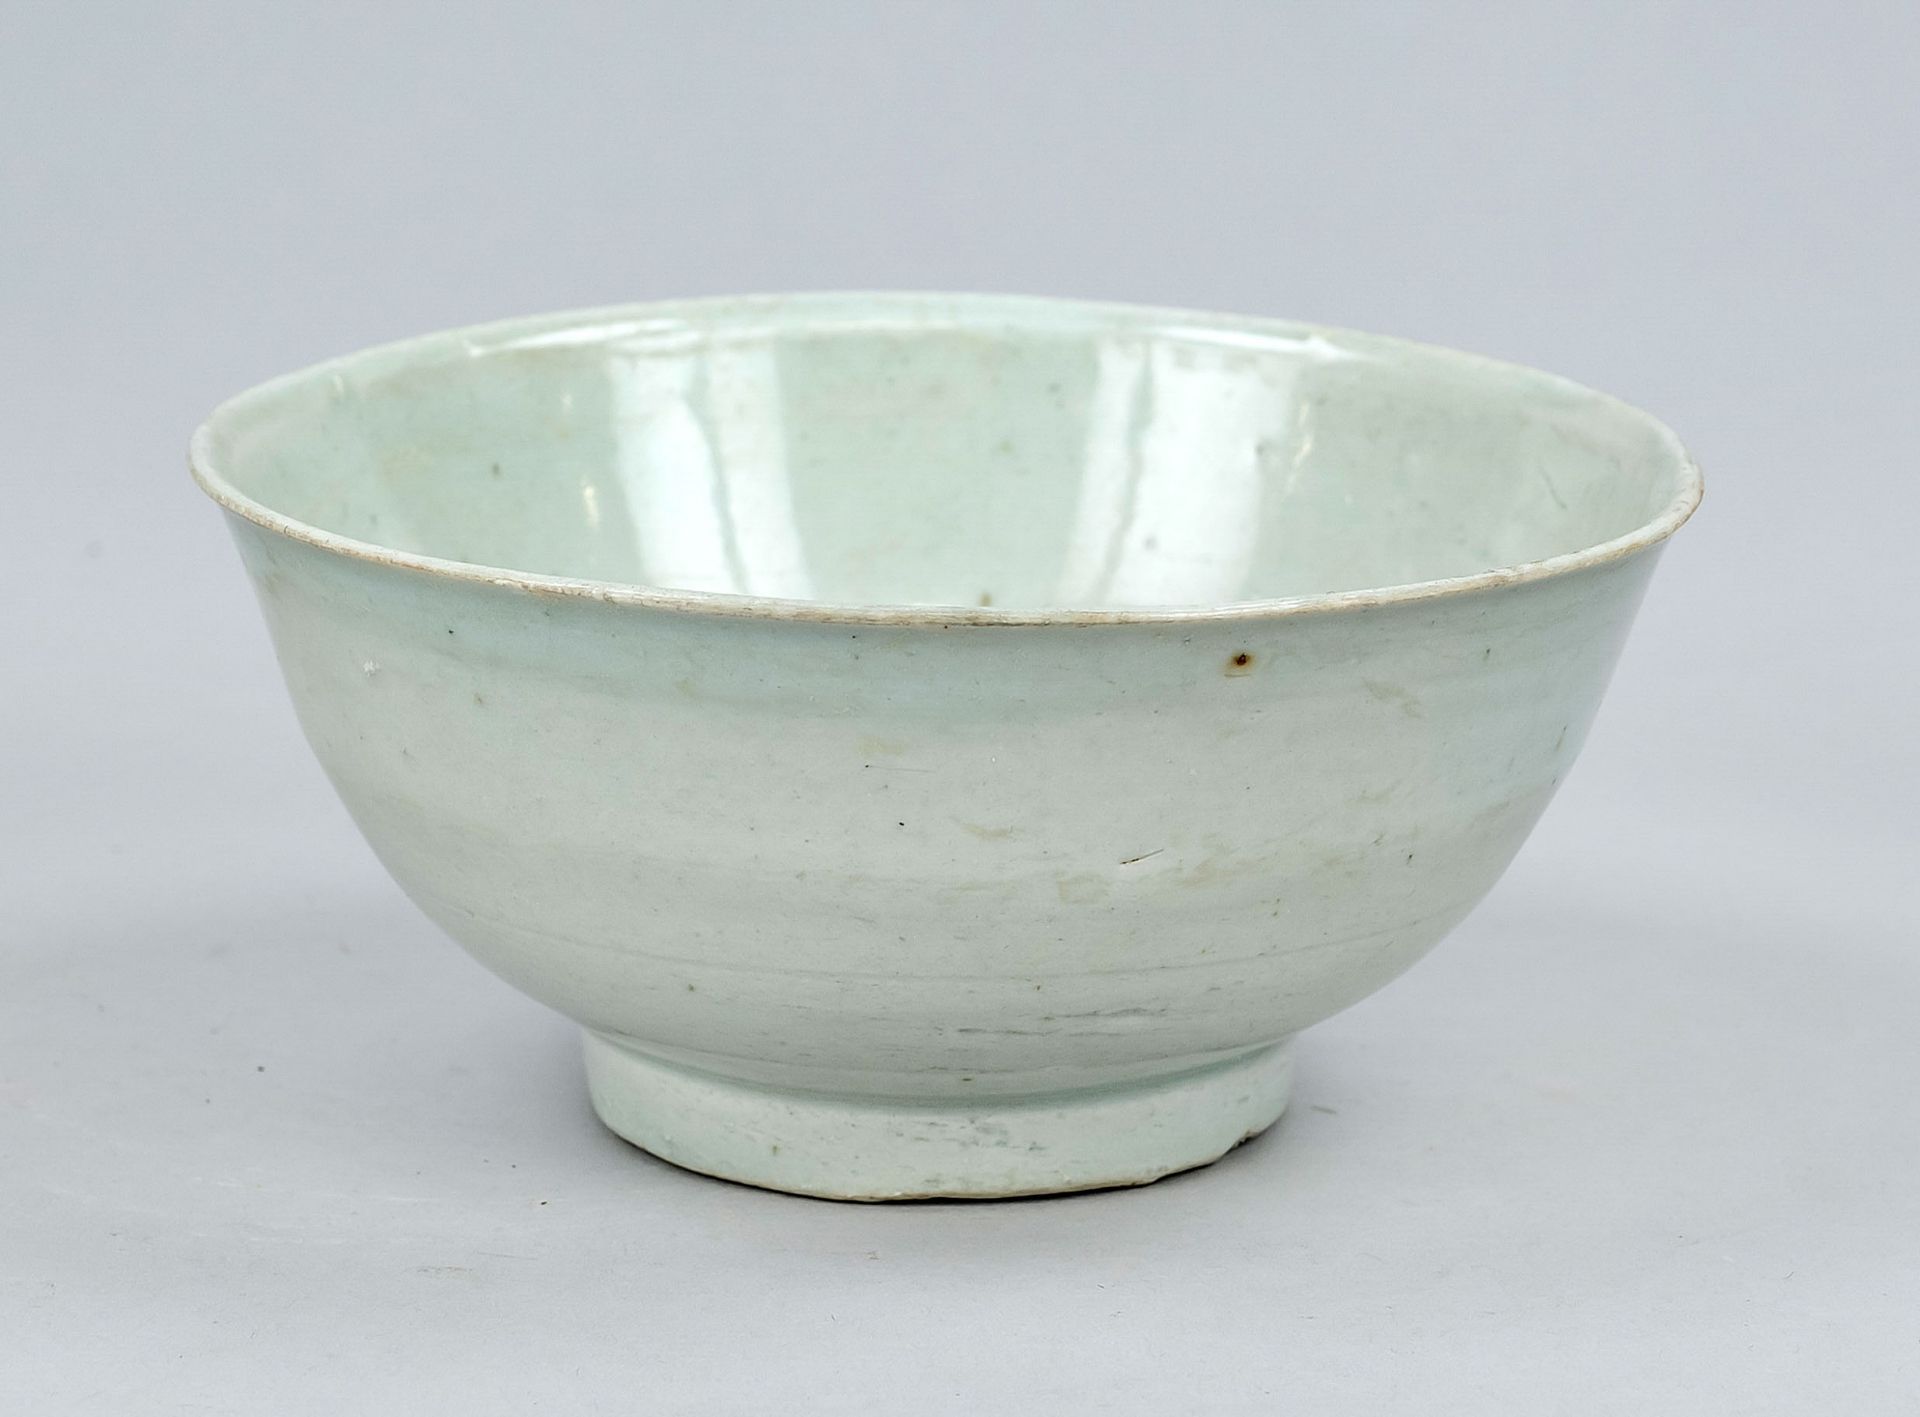 Seladon bowl, China, Ming dynasty(1368-1644), 15th/16th c., porcelain with dove blue glaze in period